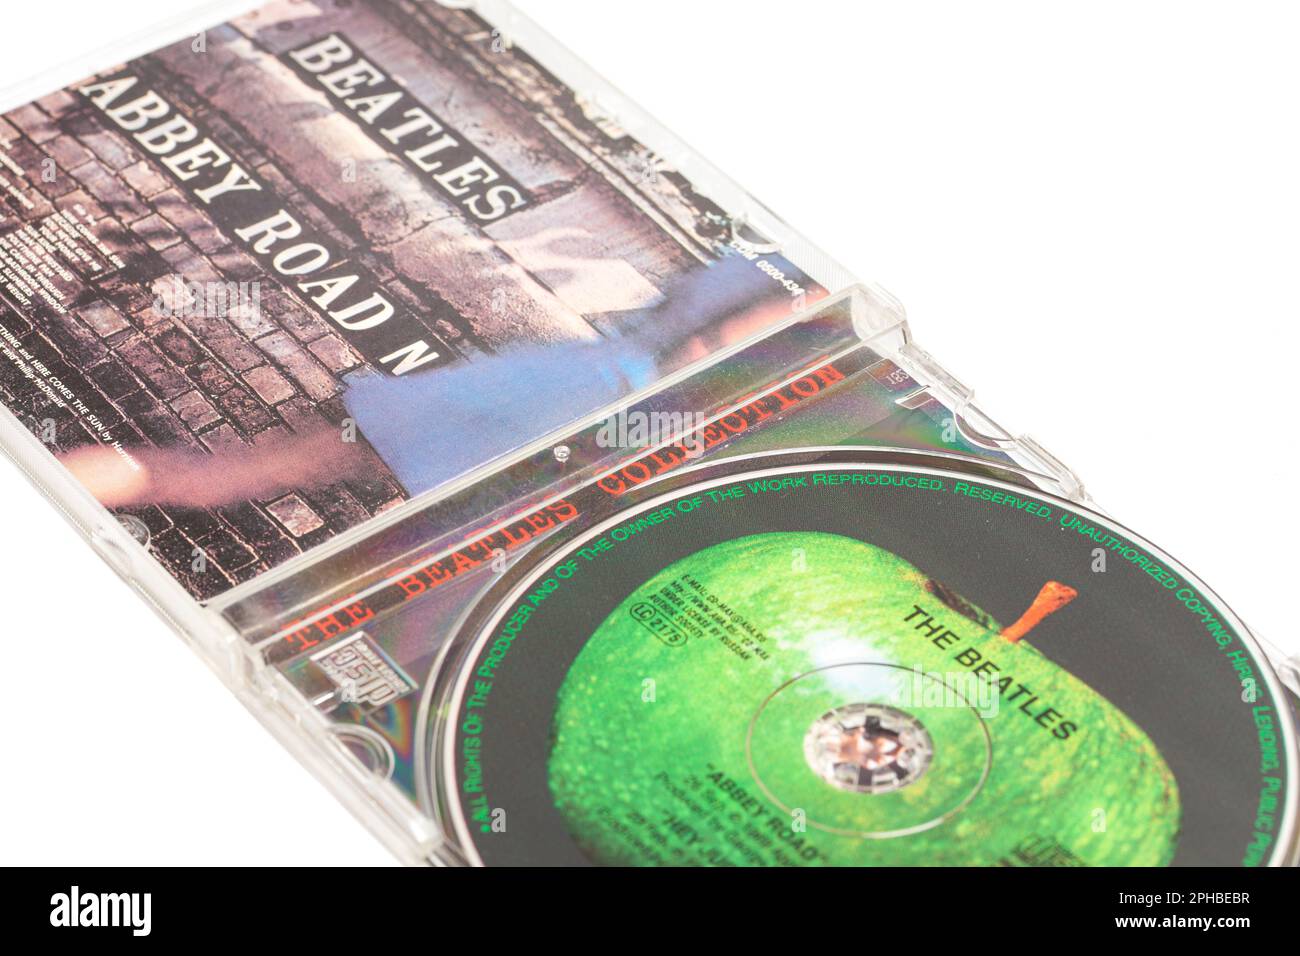 Moscow, Russia, 27 March 2023: CD by The Beatles Abbey Road, Hey Jude. Stock Photo